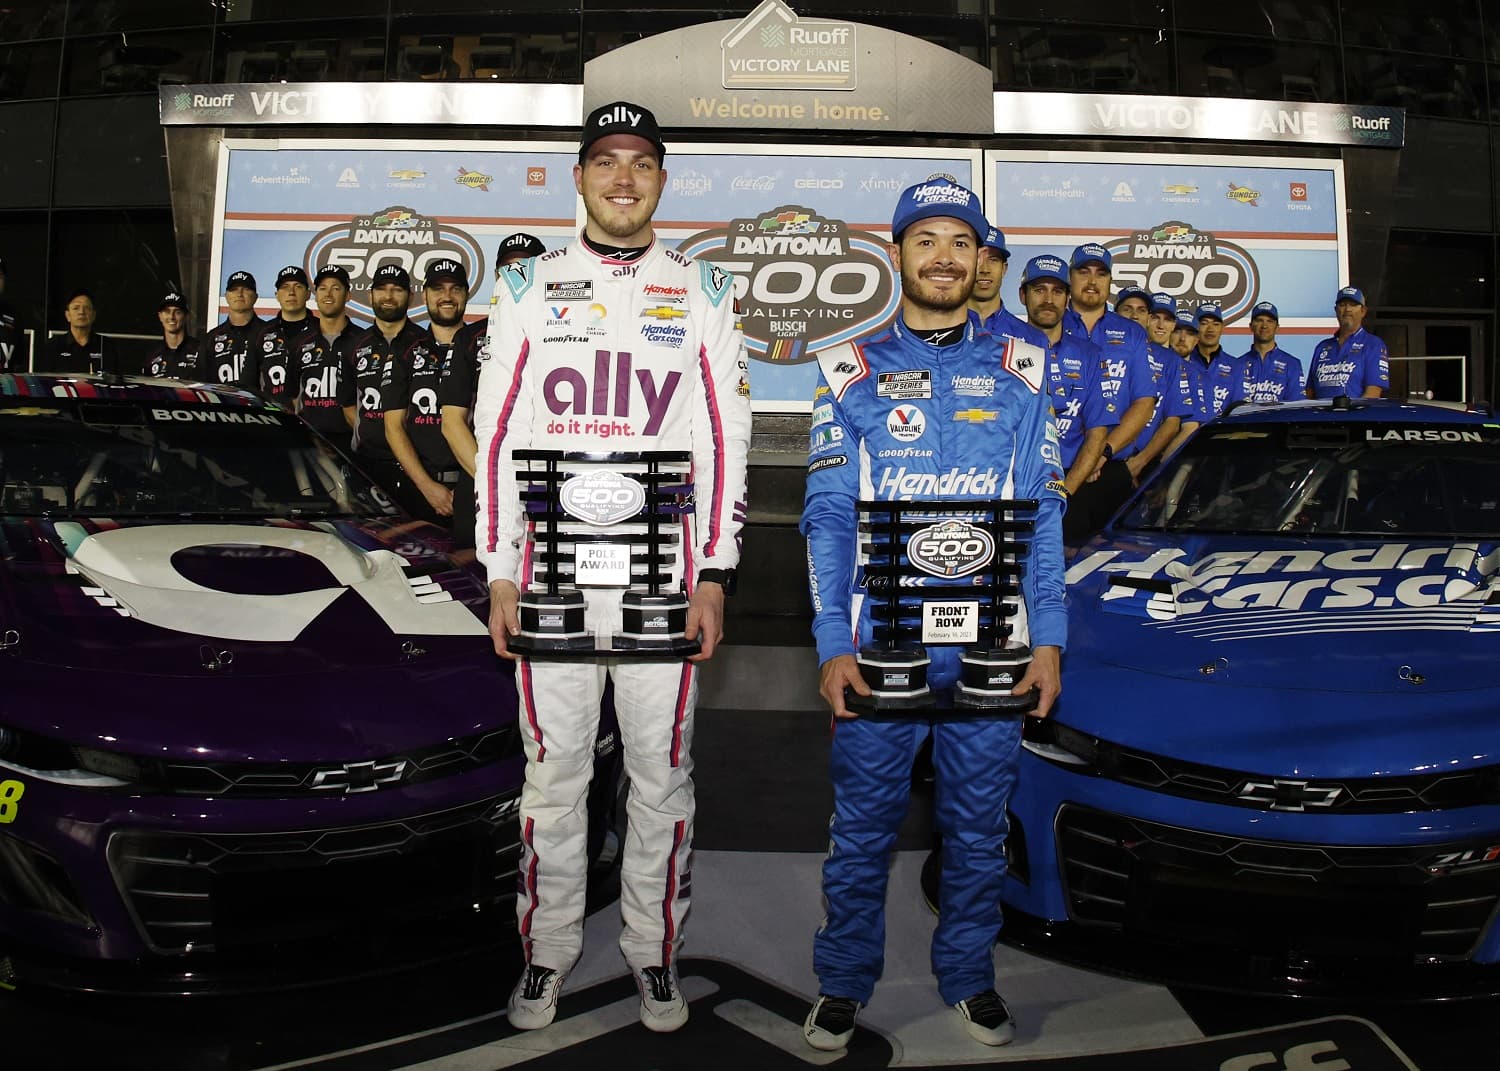 Pole Award winner Alex Bowman and front-row qualifier Kyle Larson pose for photos after the Busch Light Pole at Daytona International Speedway on Feb. 15, 2023. | Sean Gardner/Getty Images